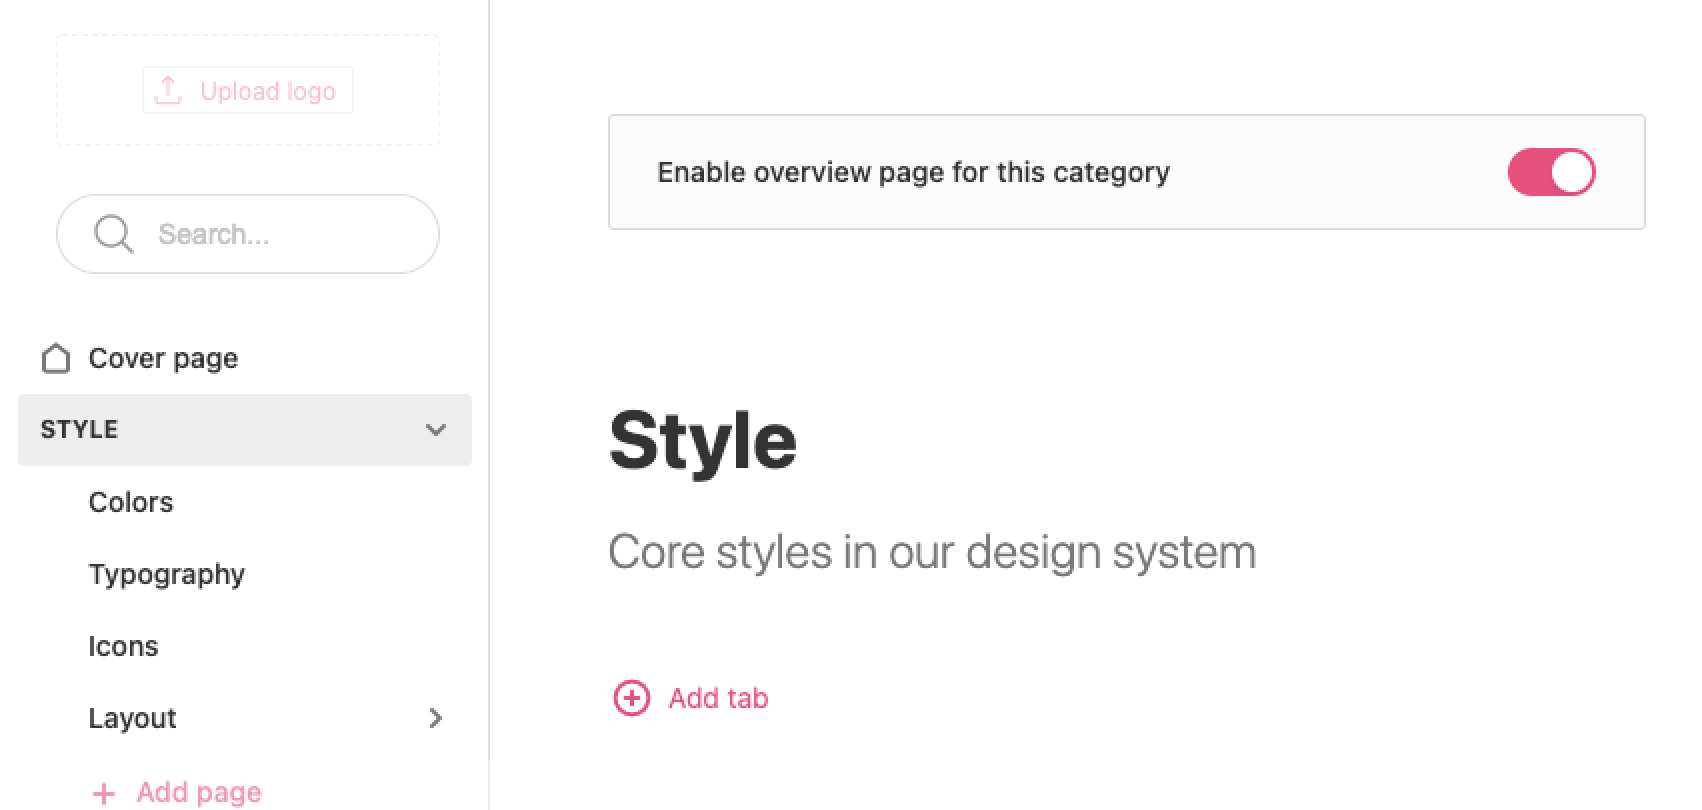 Overview page is enabled for a styleguide page category.